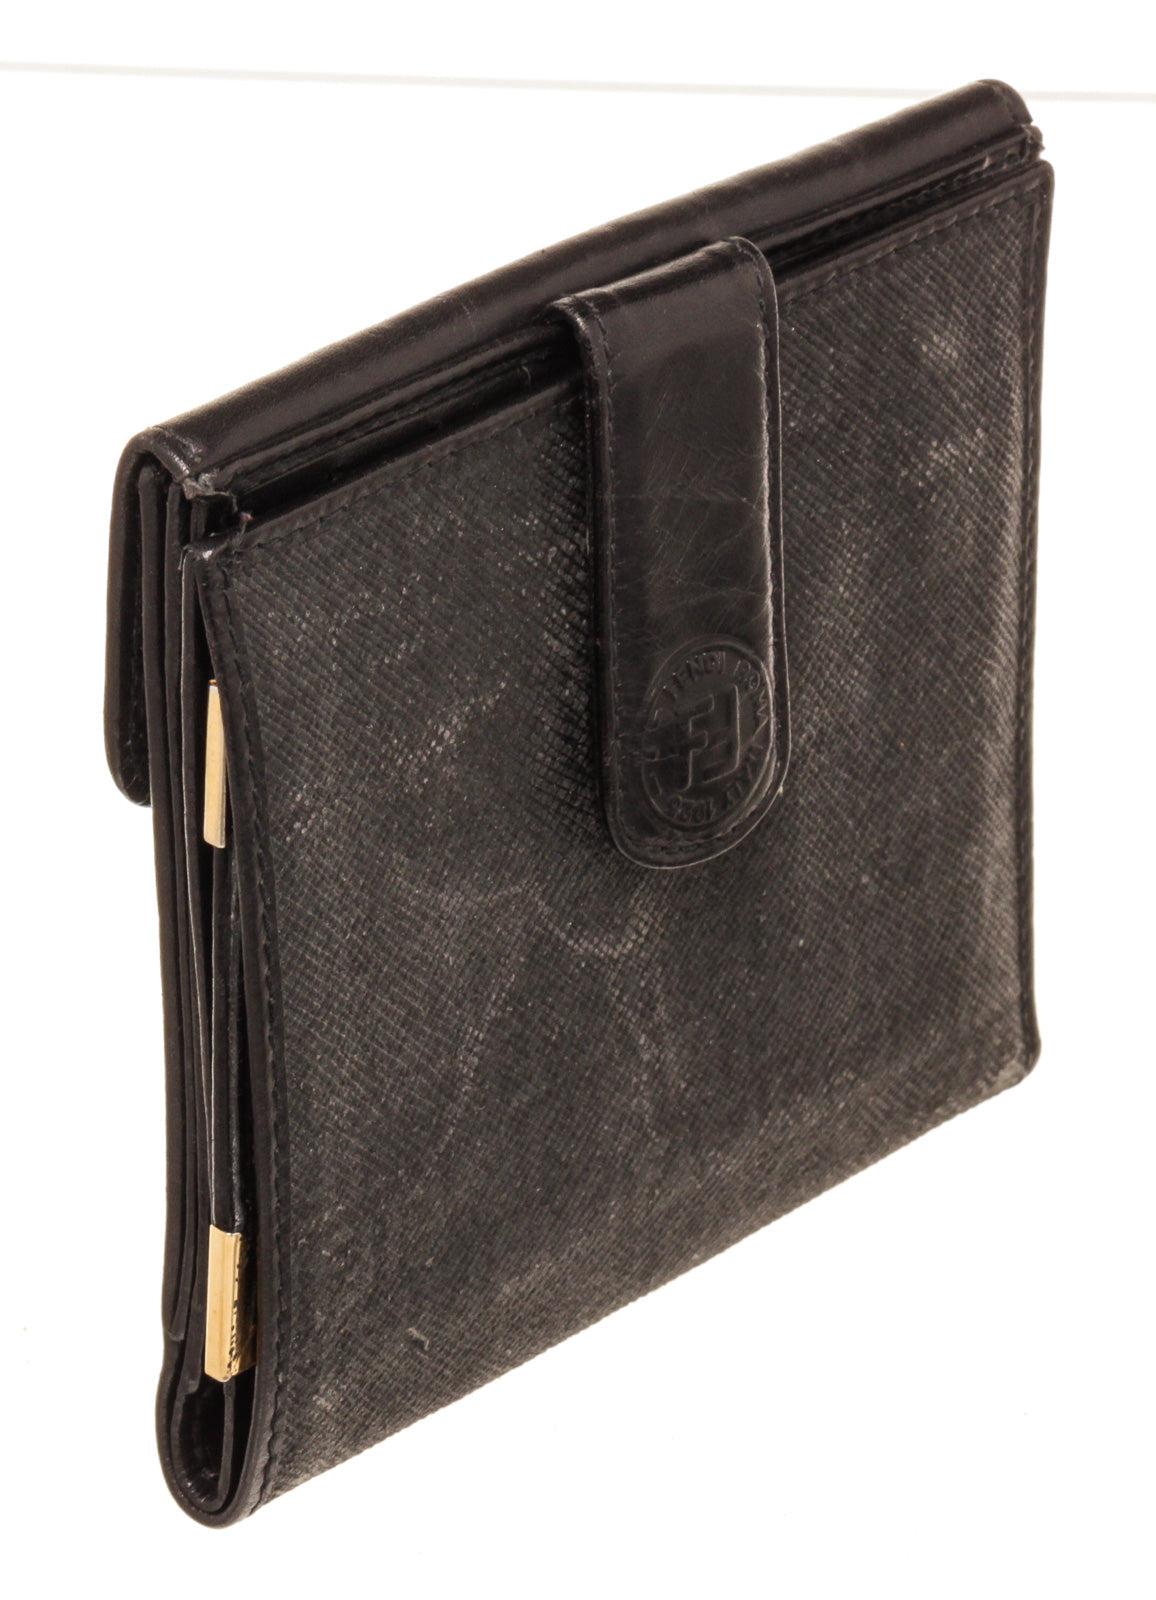 Fendi Black Canvas Compact Tab Wallet with canvas gold-tone hardware, interior  In Fair Condition For Sale In Irvine, CA